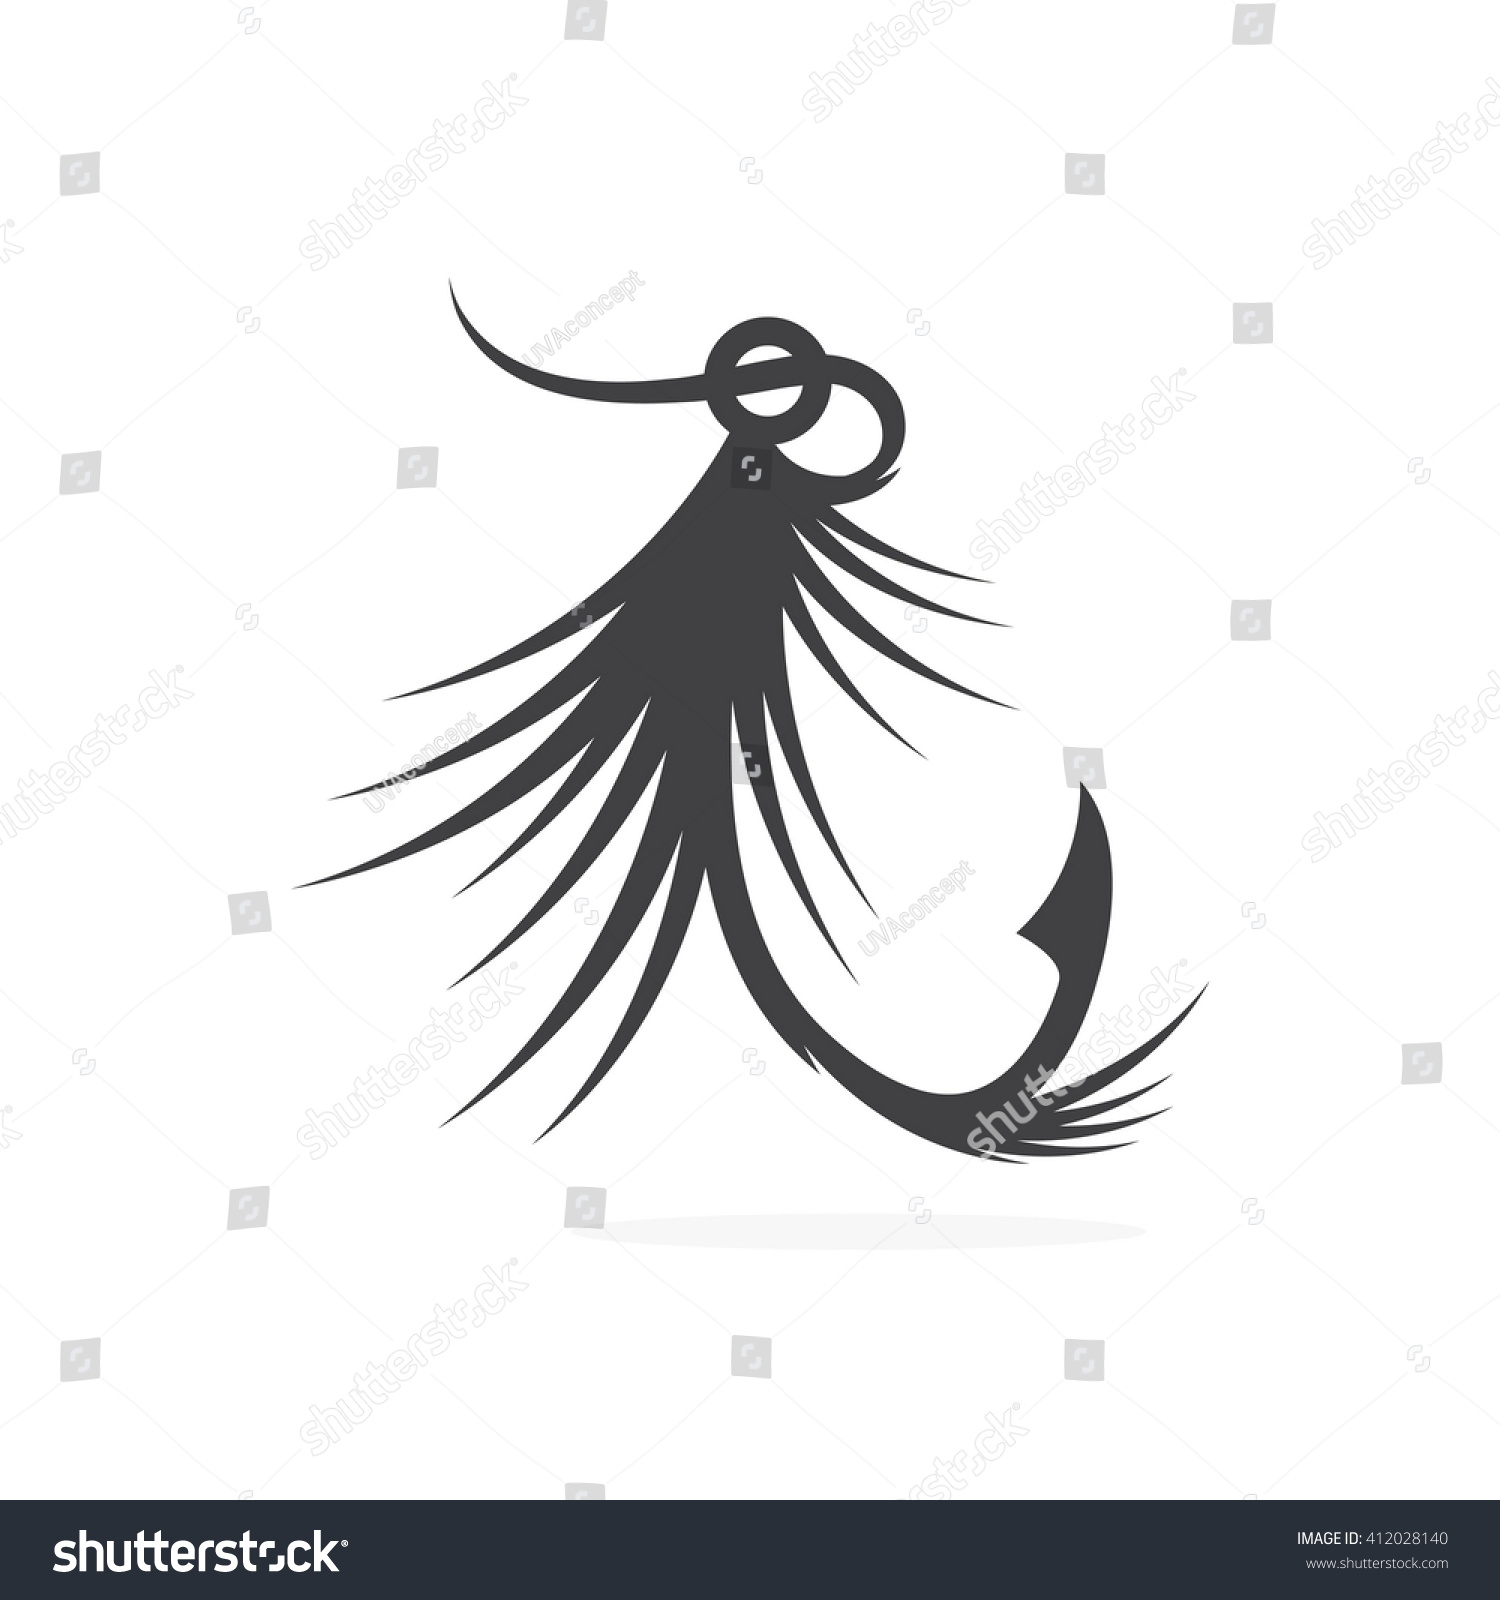 Download Fly Fishing Lure Fishing Line Vector Stock Vector ...